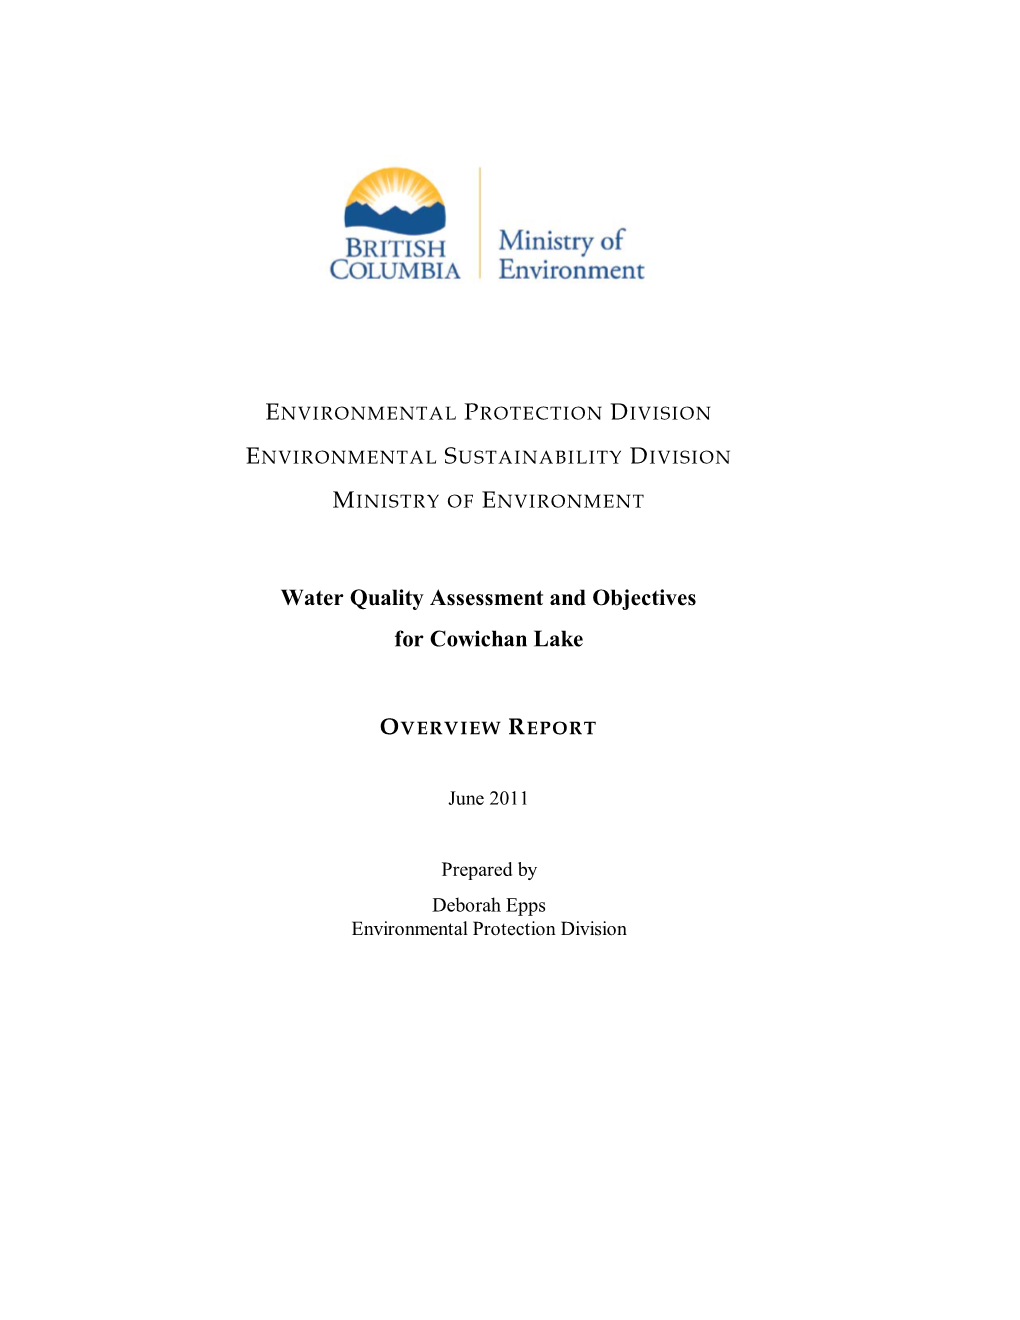 Water Quality Assessment and Objectives for Cowichan Lake